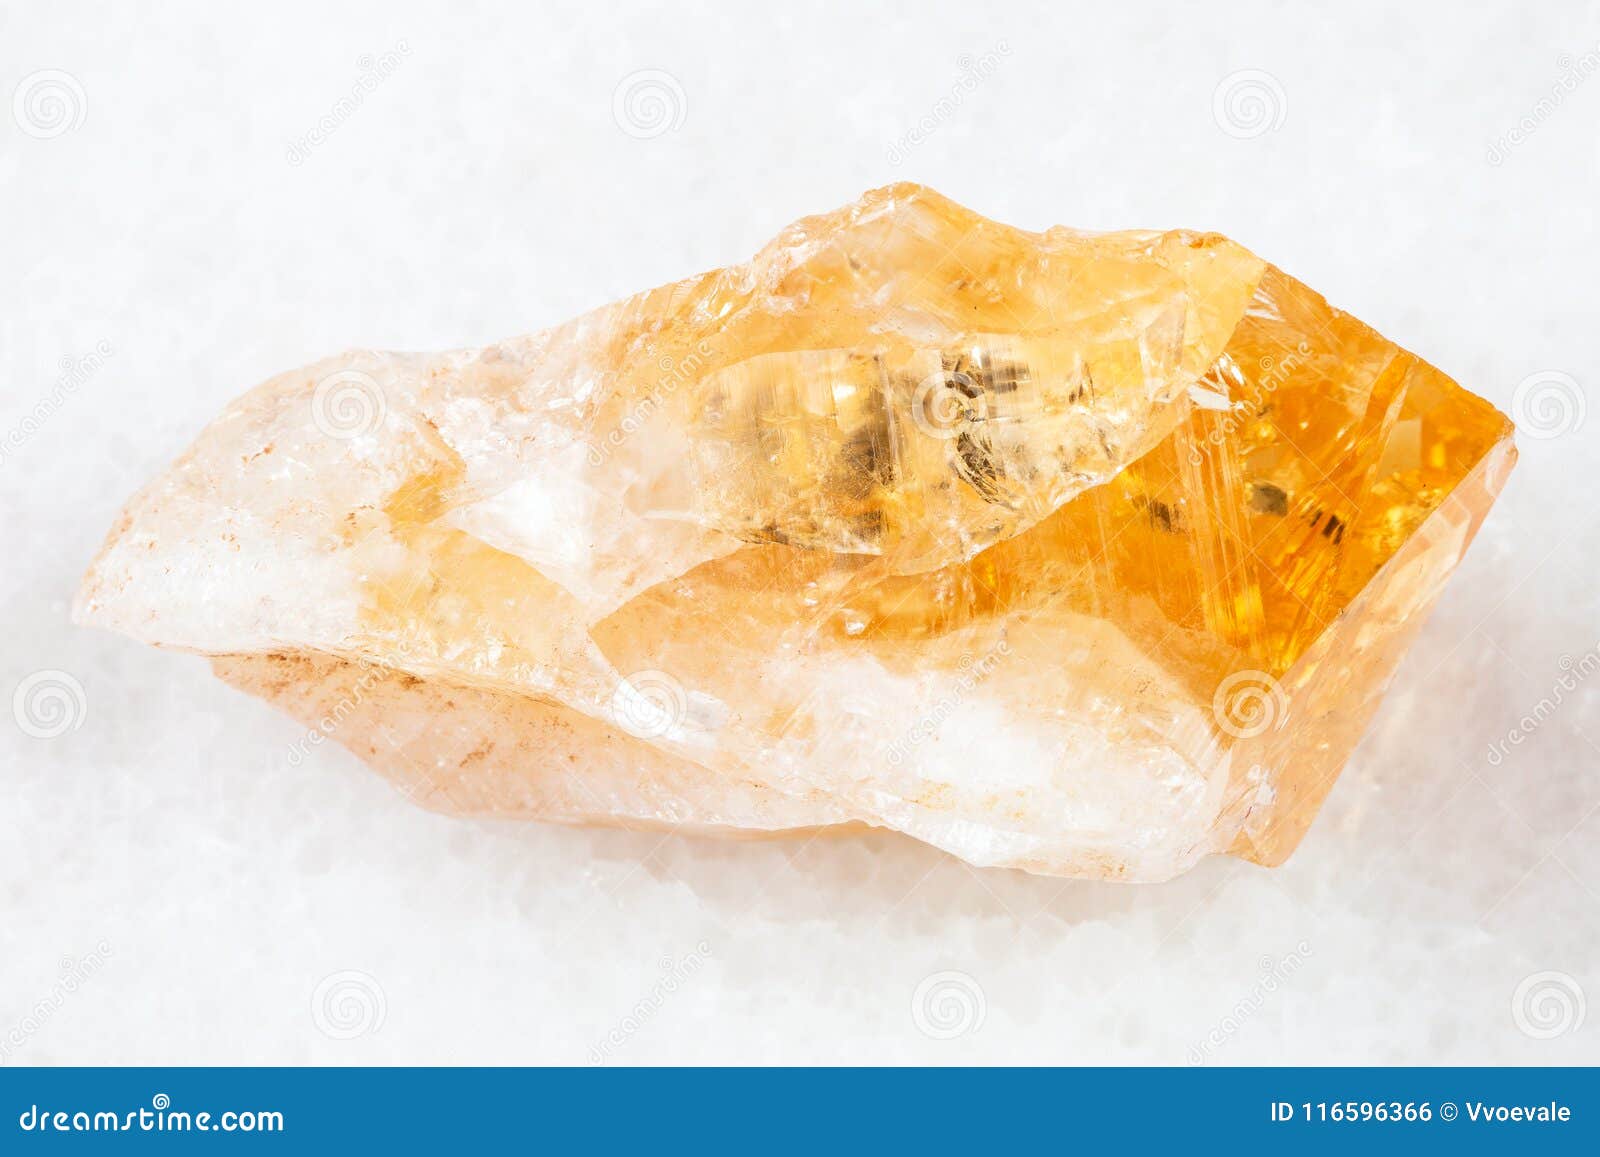 Rough Crystal Of Citrine Yellow Quartz On White Stock Photo Image Of Material Geological